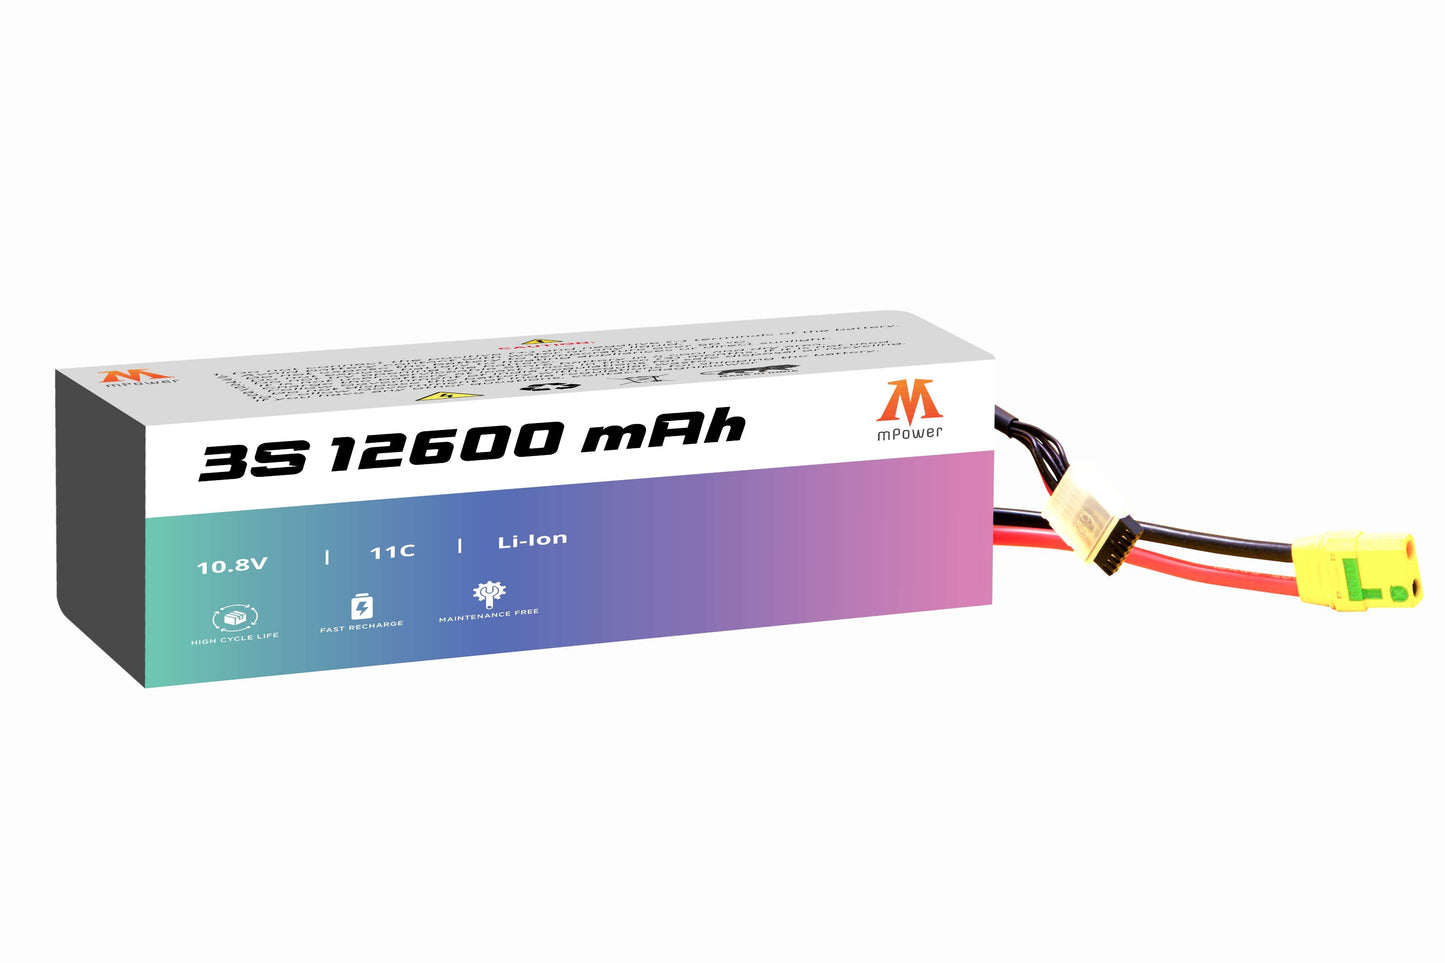 mPower 3S 12600mAh Lithium-Ion Battery for Surveillance Drones